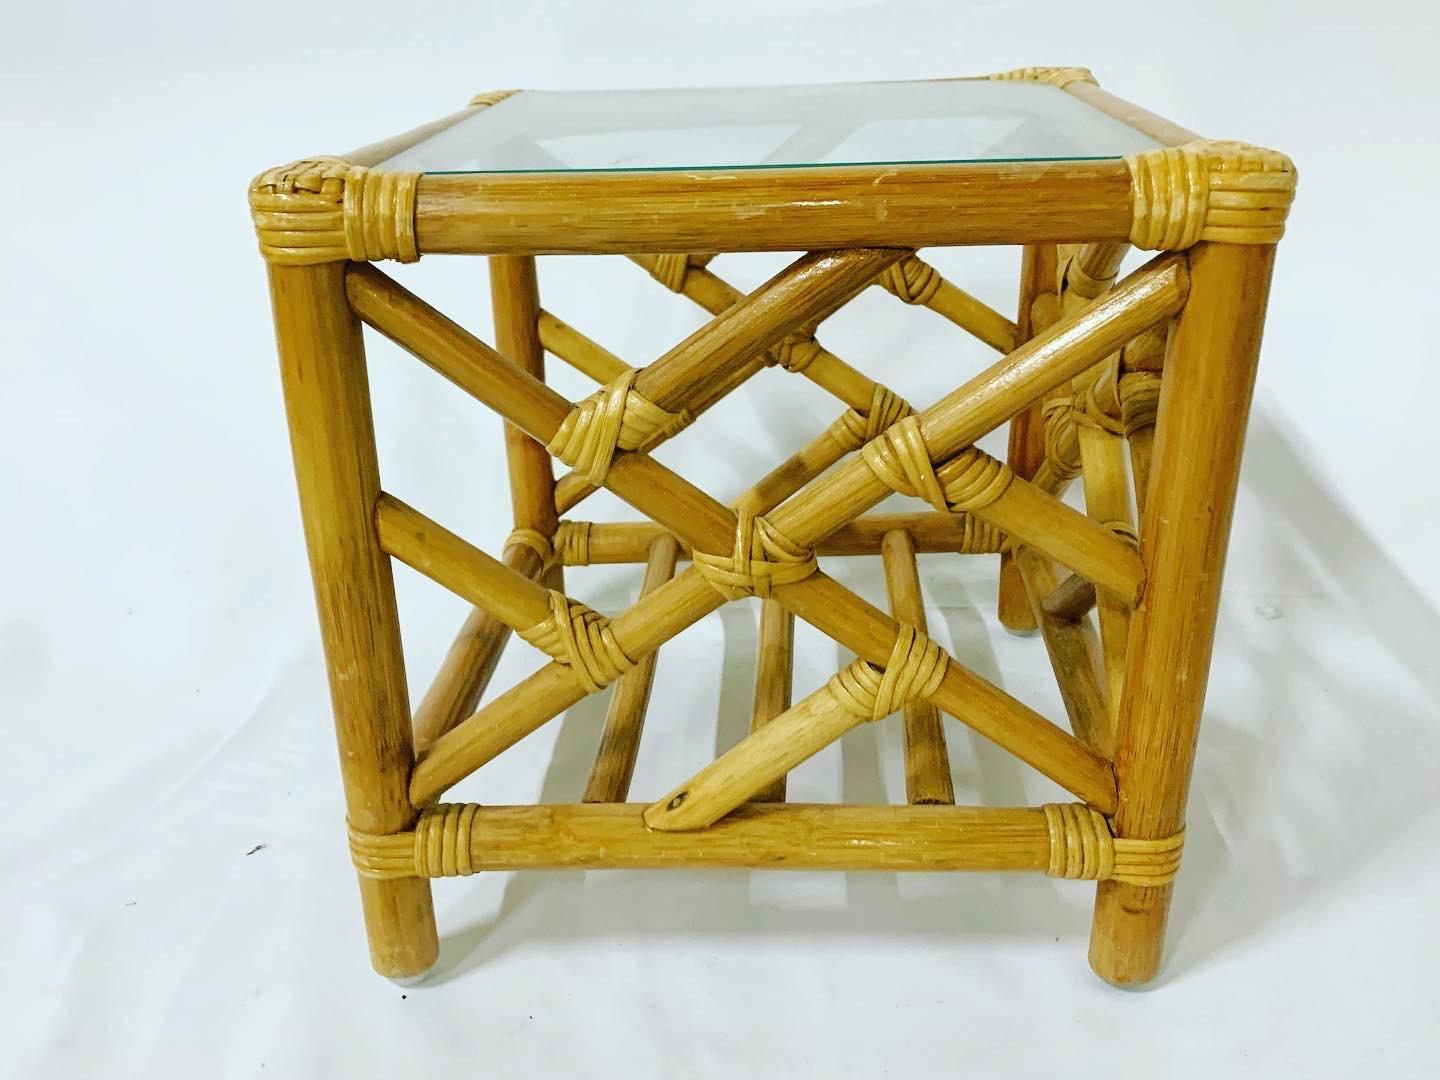 Chippendale Bamboo Rattan Nesting Tables - Set of 3 In Good Condition For Sale In Delray Beach, FL